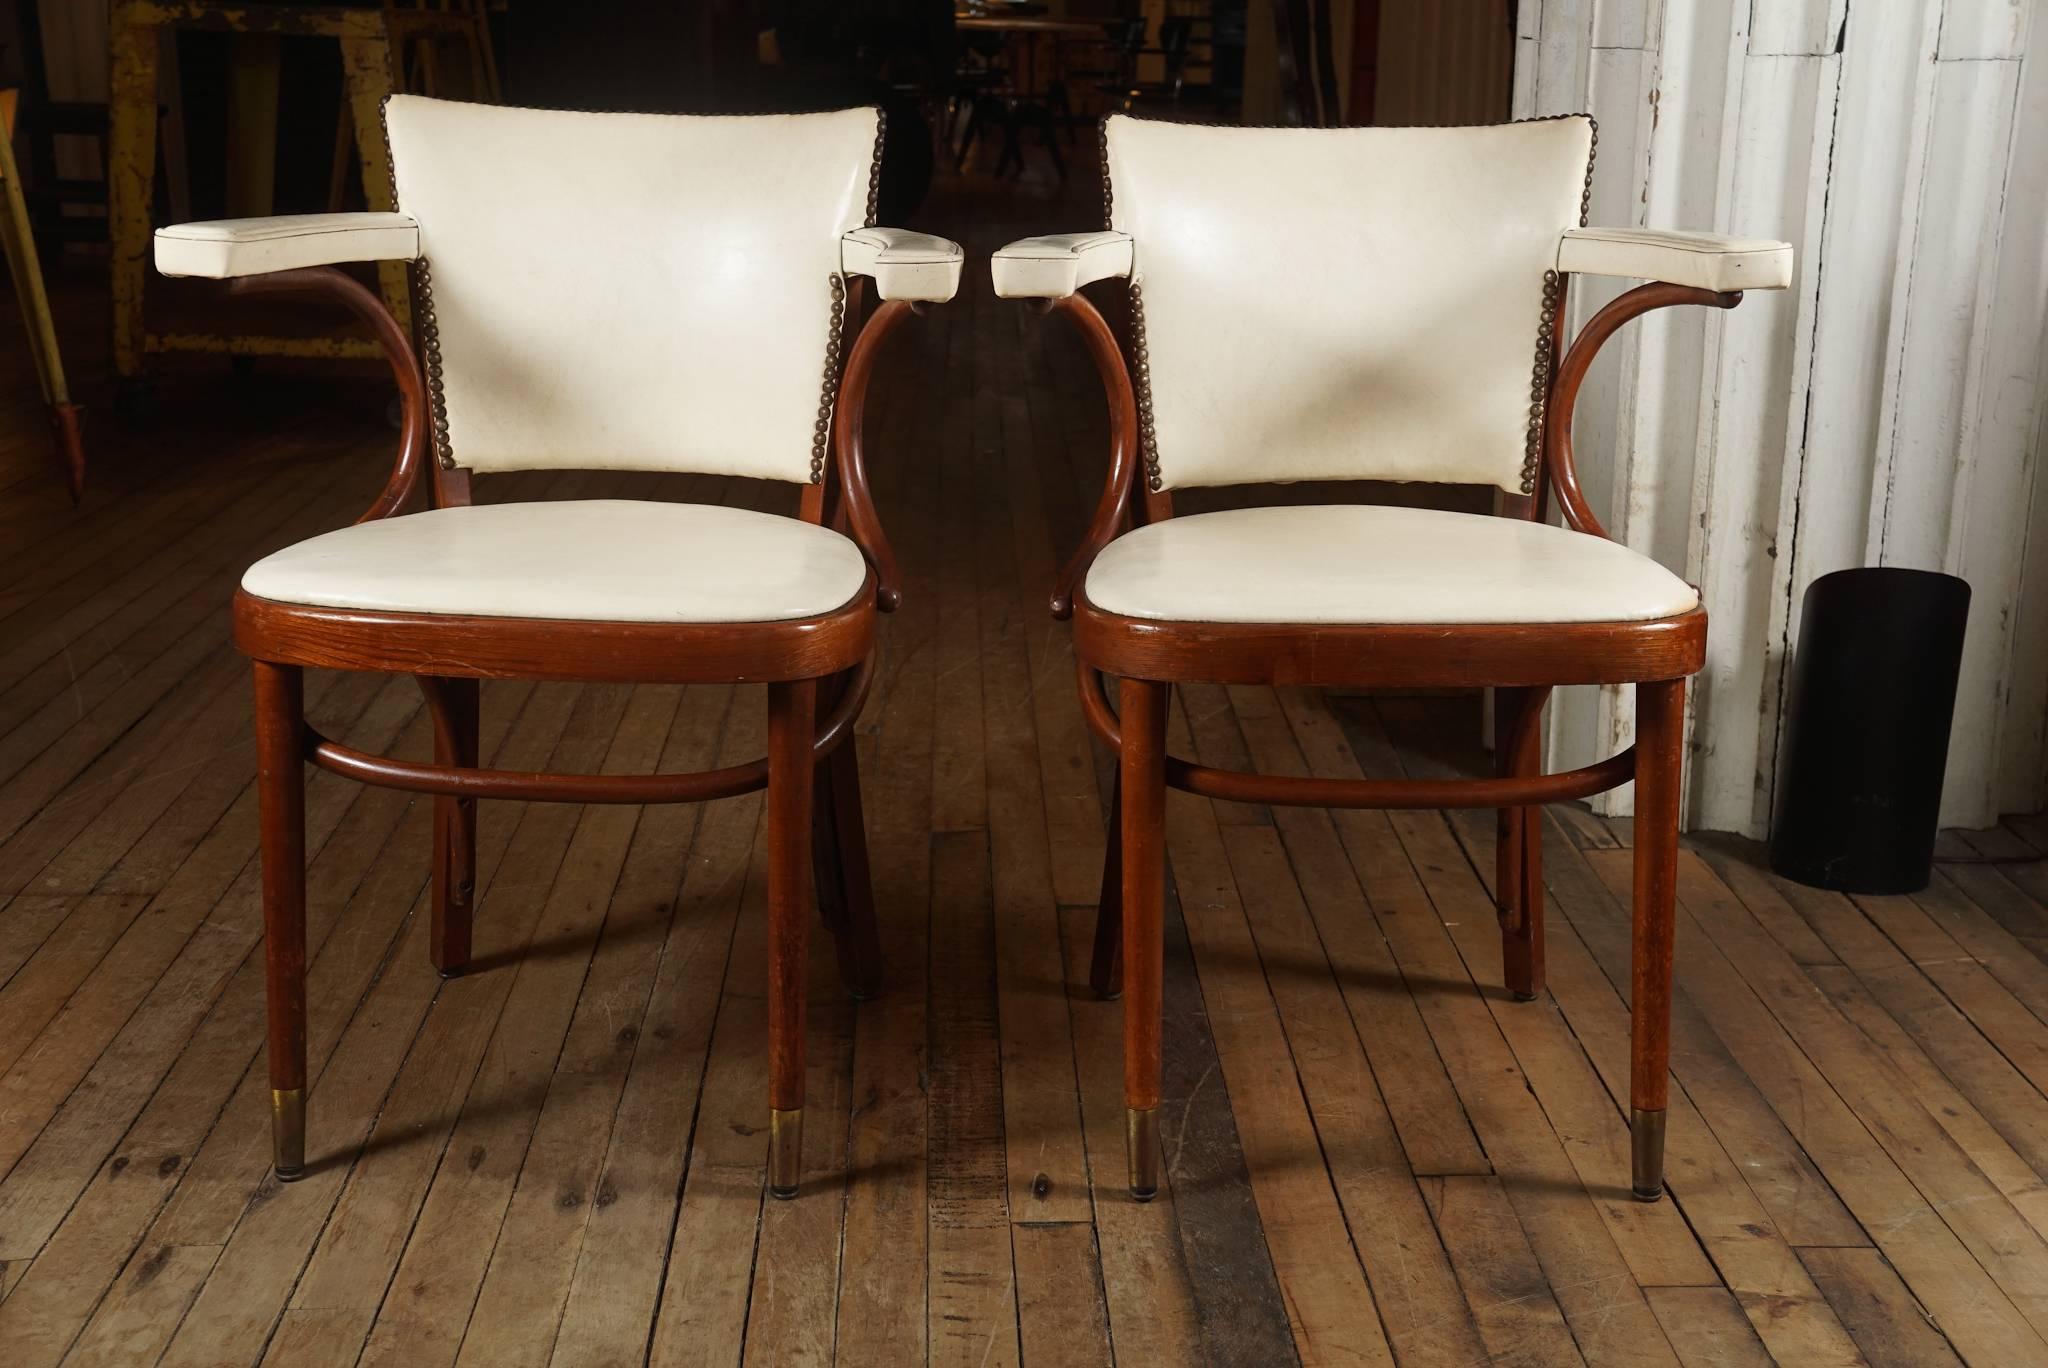 Pair of bentwood Thonet armchairs upholstered in an off white leather, brass tack trim, brass sleeves on front feet.